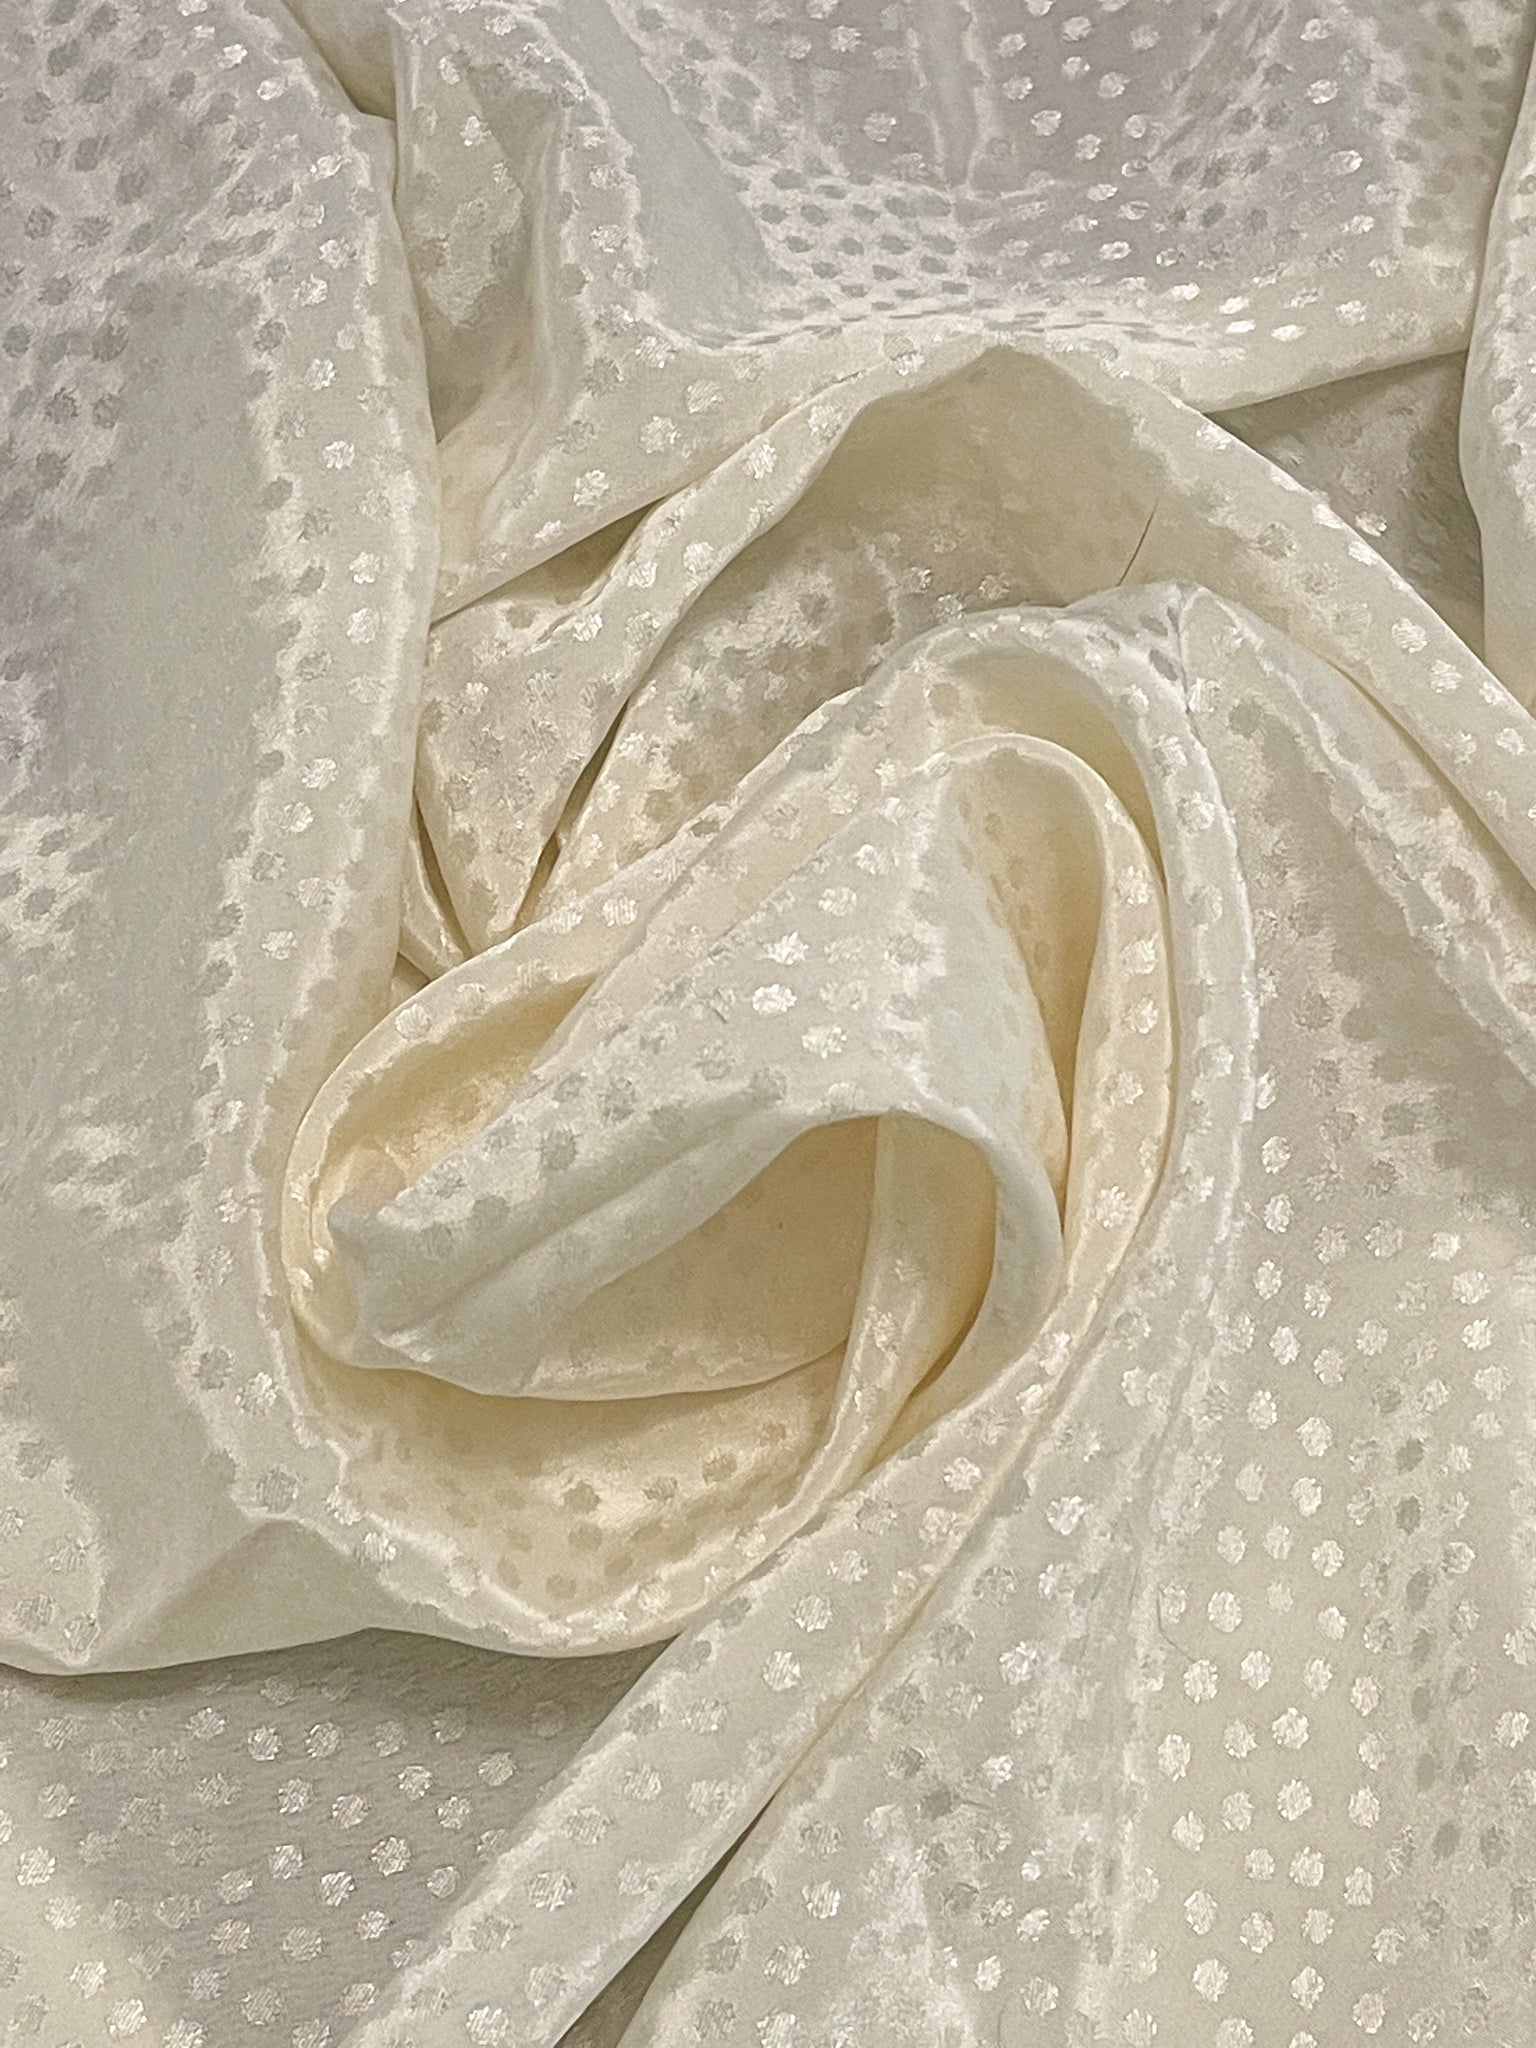 SALE 1 1/3 YD Polyester Jacquard - Off White with Small Polka Dots